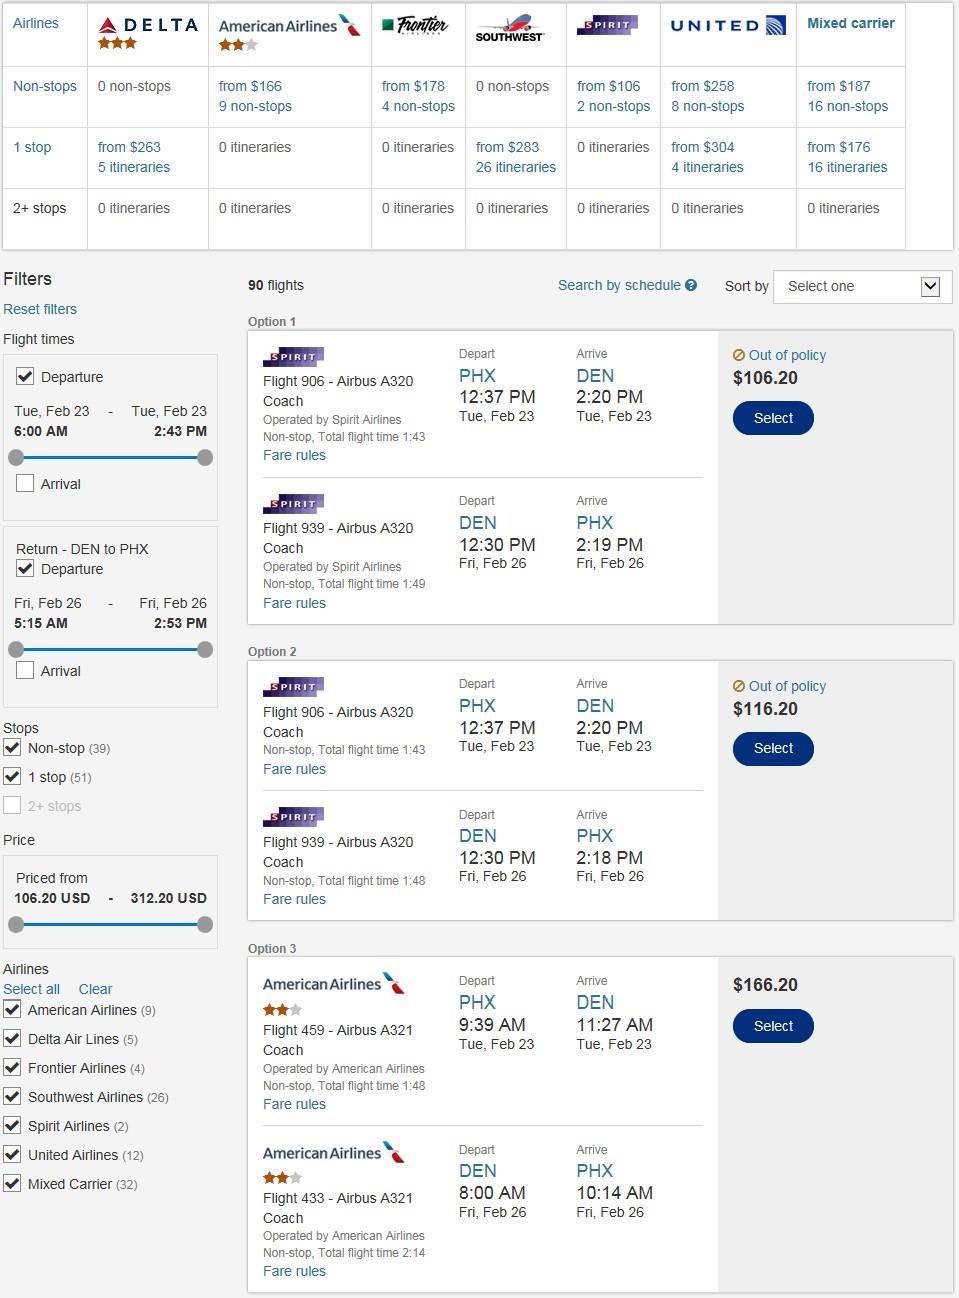 The flight options display below the matrix. Preferred options appear at the top, then by fare from low to high. You can sort the results by airline, number of stops, or fare.